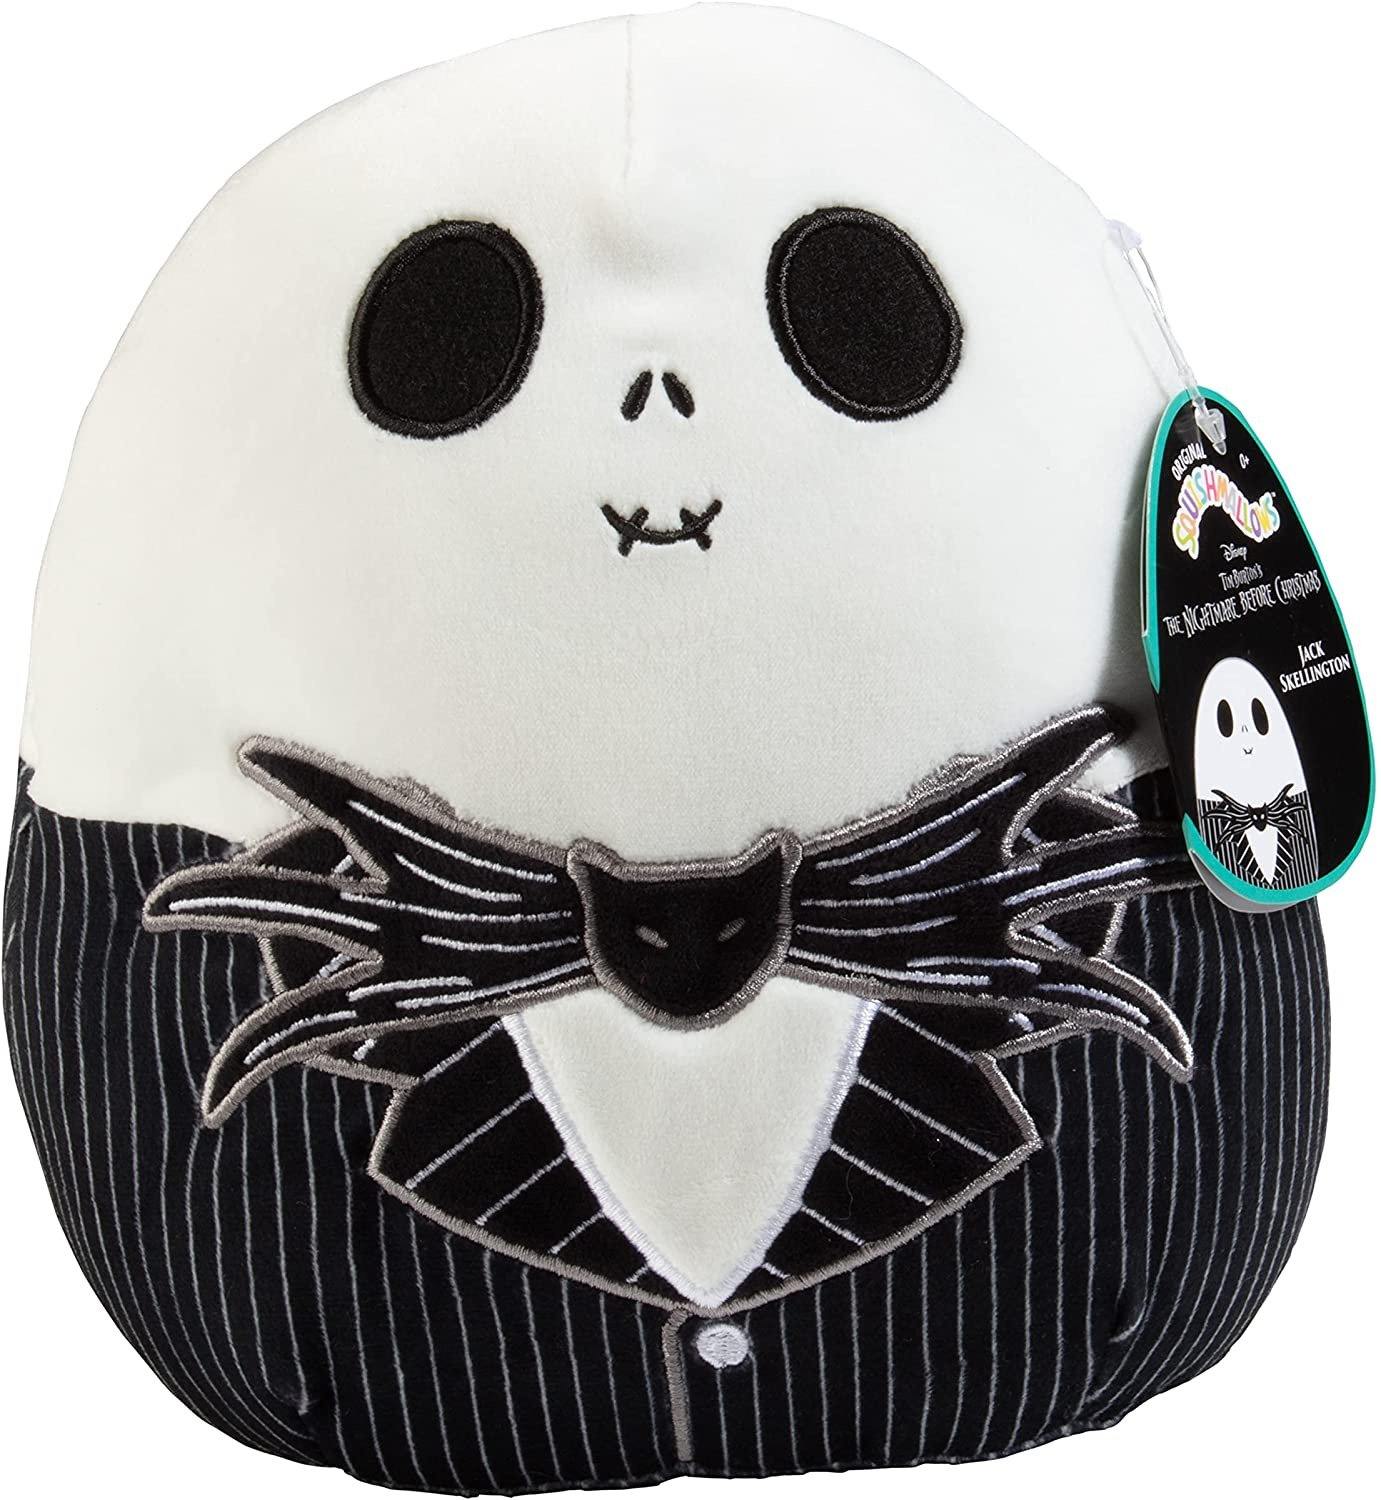 Squishmallow Nightmare Before Christmas Jack Skellington- Official Kellytoy Halloween Holiday Plush - Cute and Soft Stuffed Animal Toy - Great Gift for Kids  Avilable in 8" and 12"